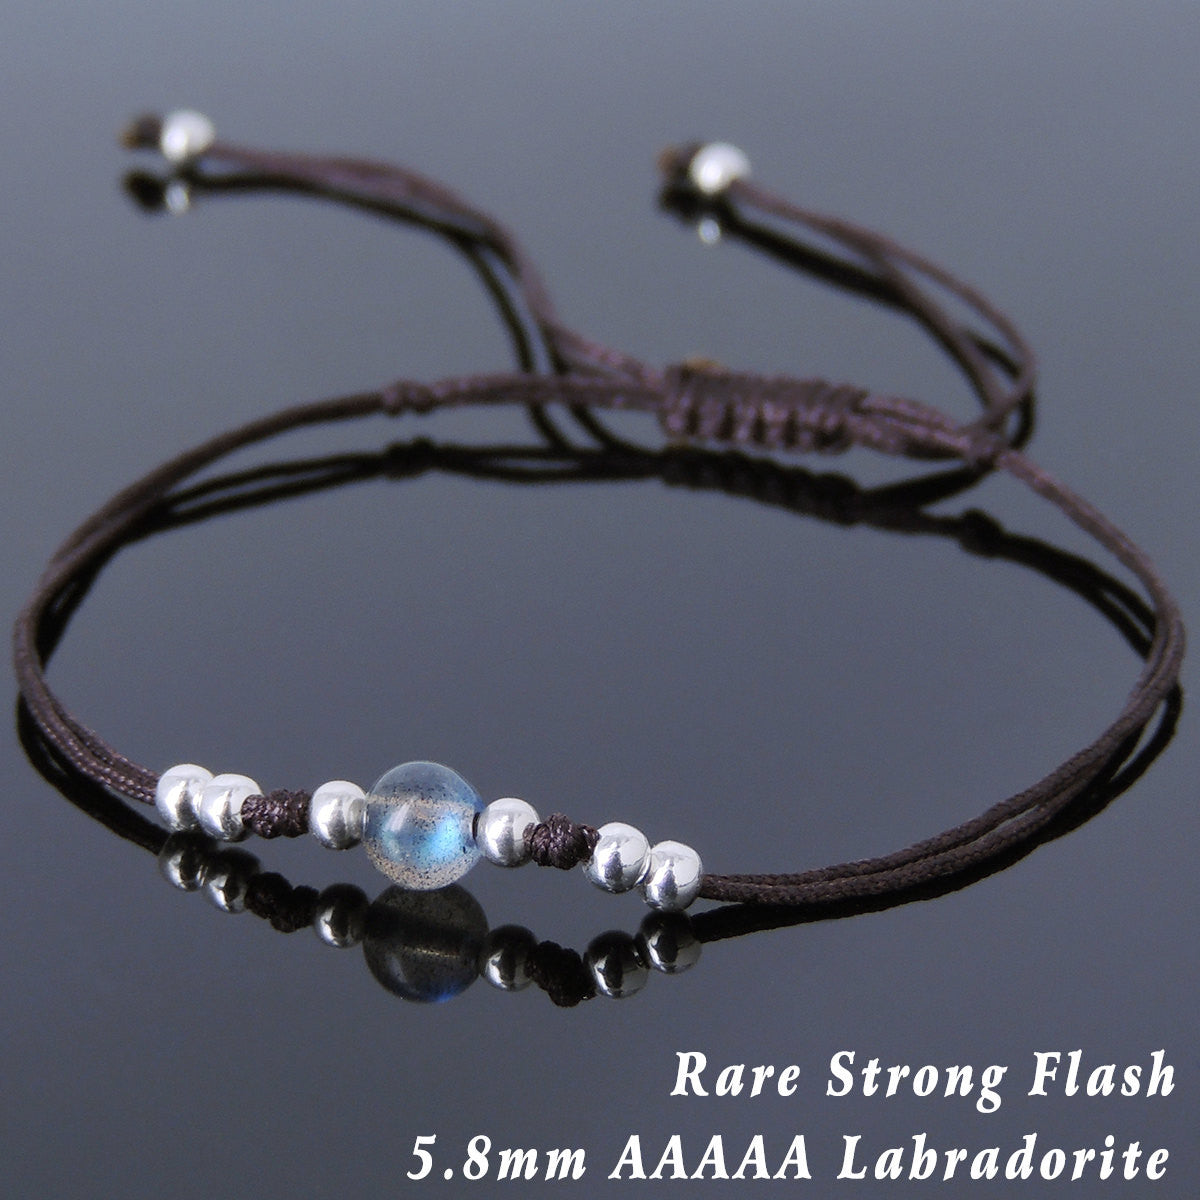 5.8mm Grade AAAAA Rare Strong Flash Labradorite Adjustable Braided Bracelet with S925 Sterling Silver 3mm Seamless Beads - Handmade by Gem & Silver BR822